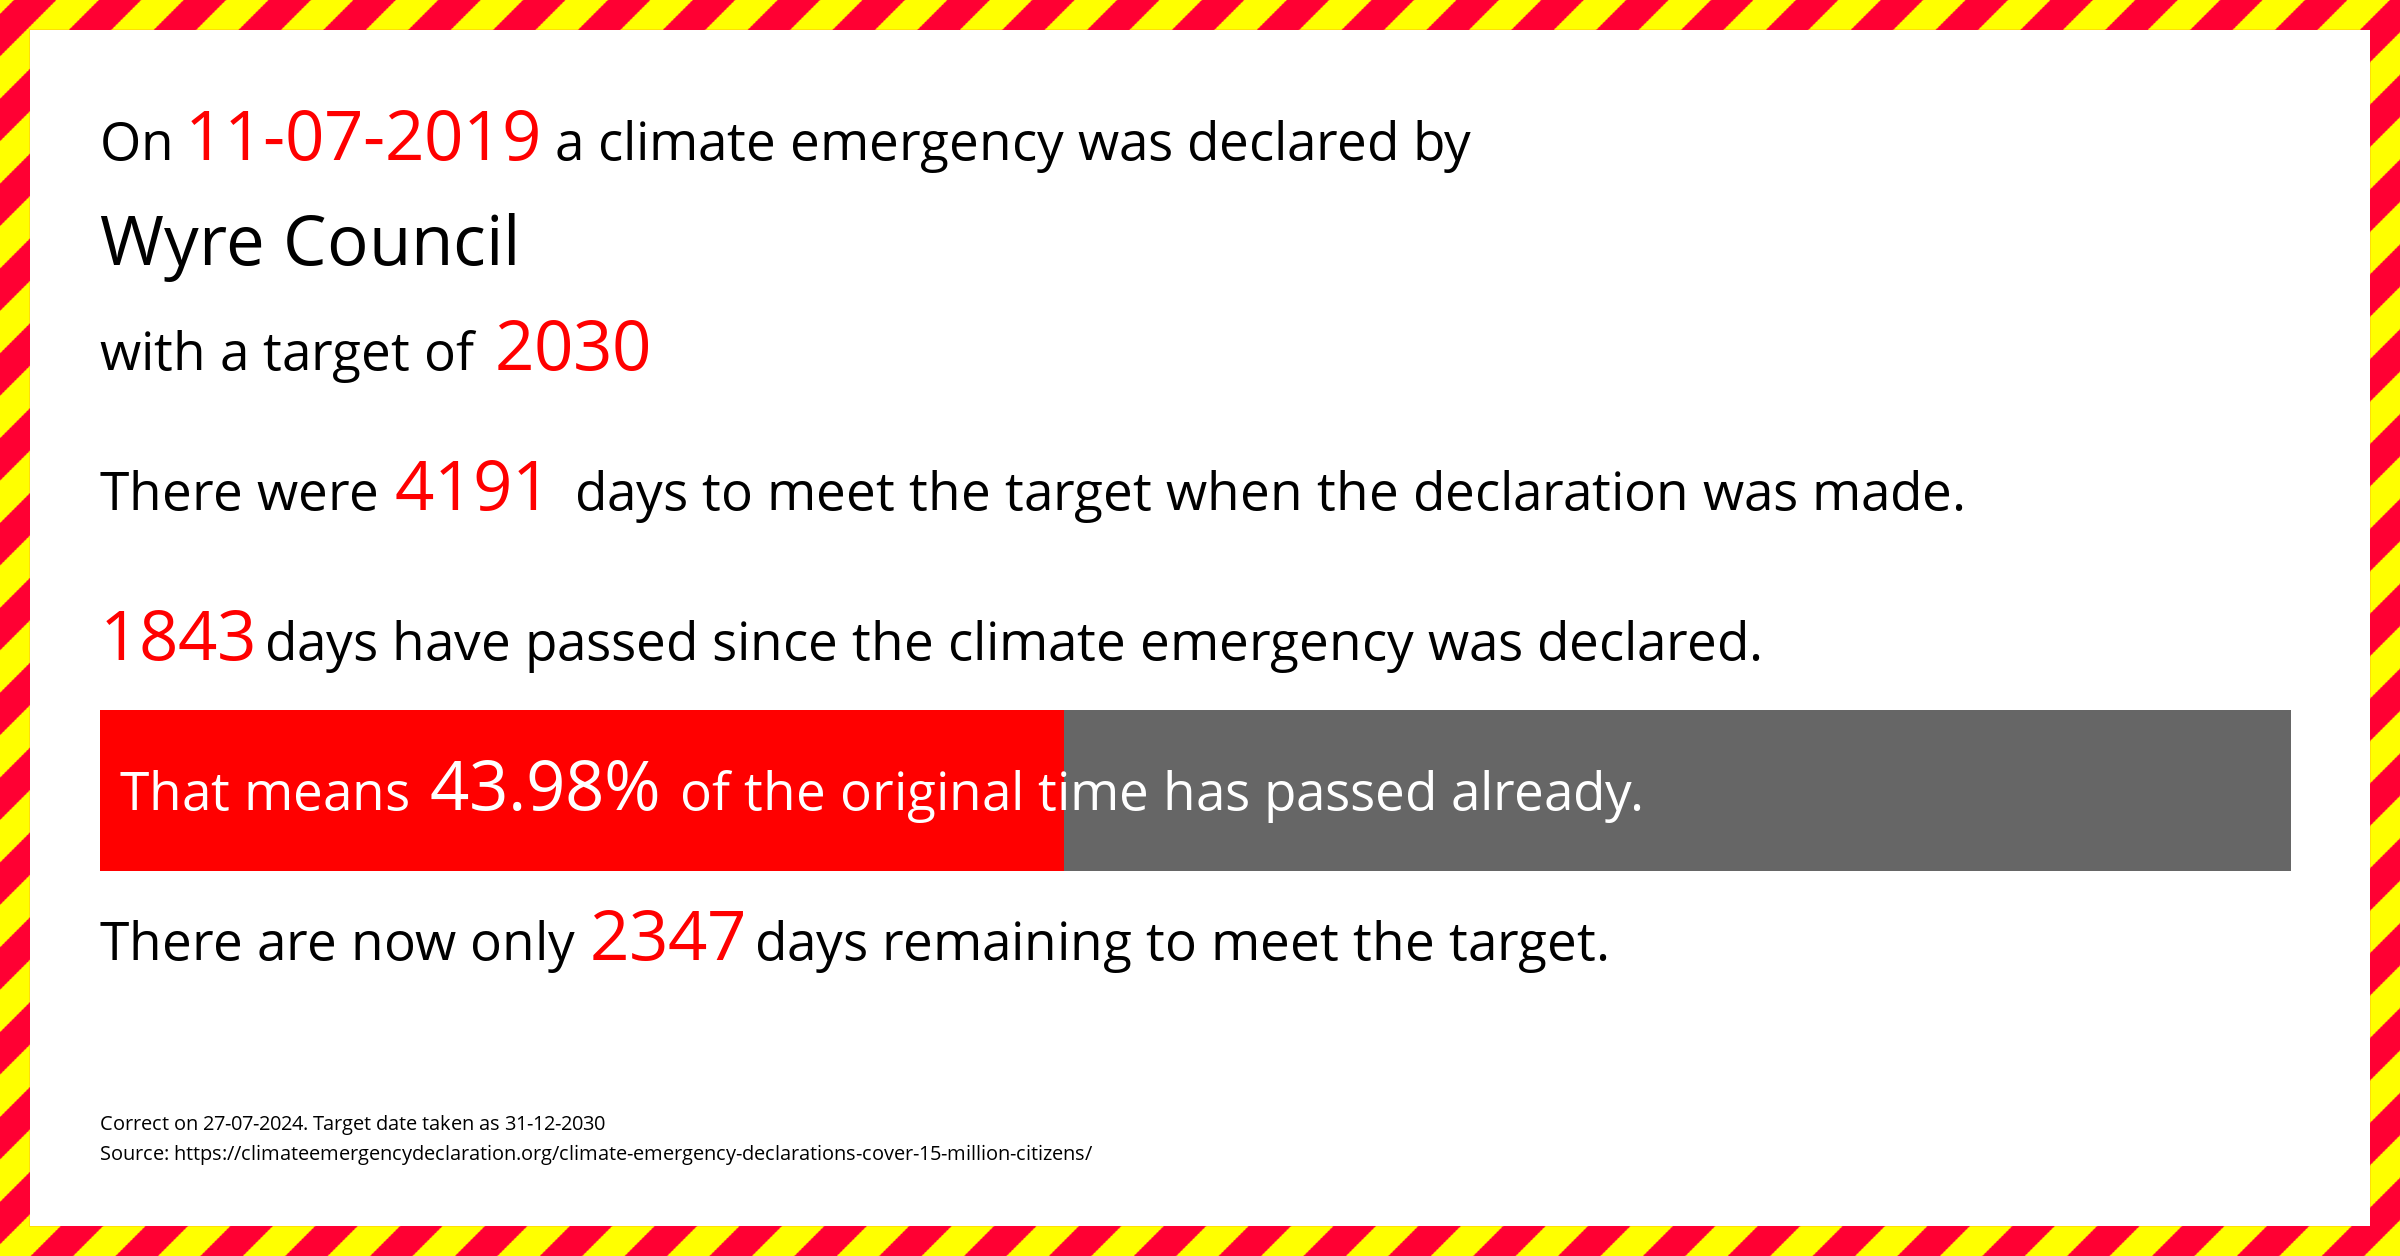 Wyre Council declared a Climate emergency on Thursday 11th July 2019, with a target of 2030.